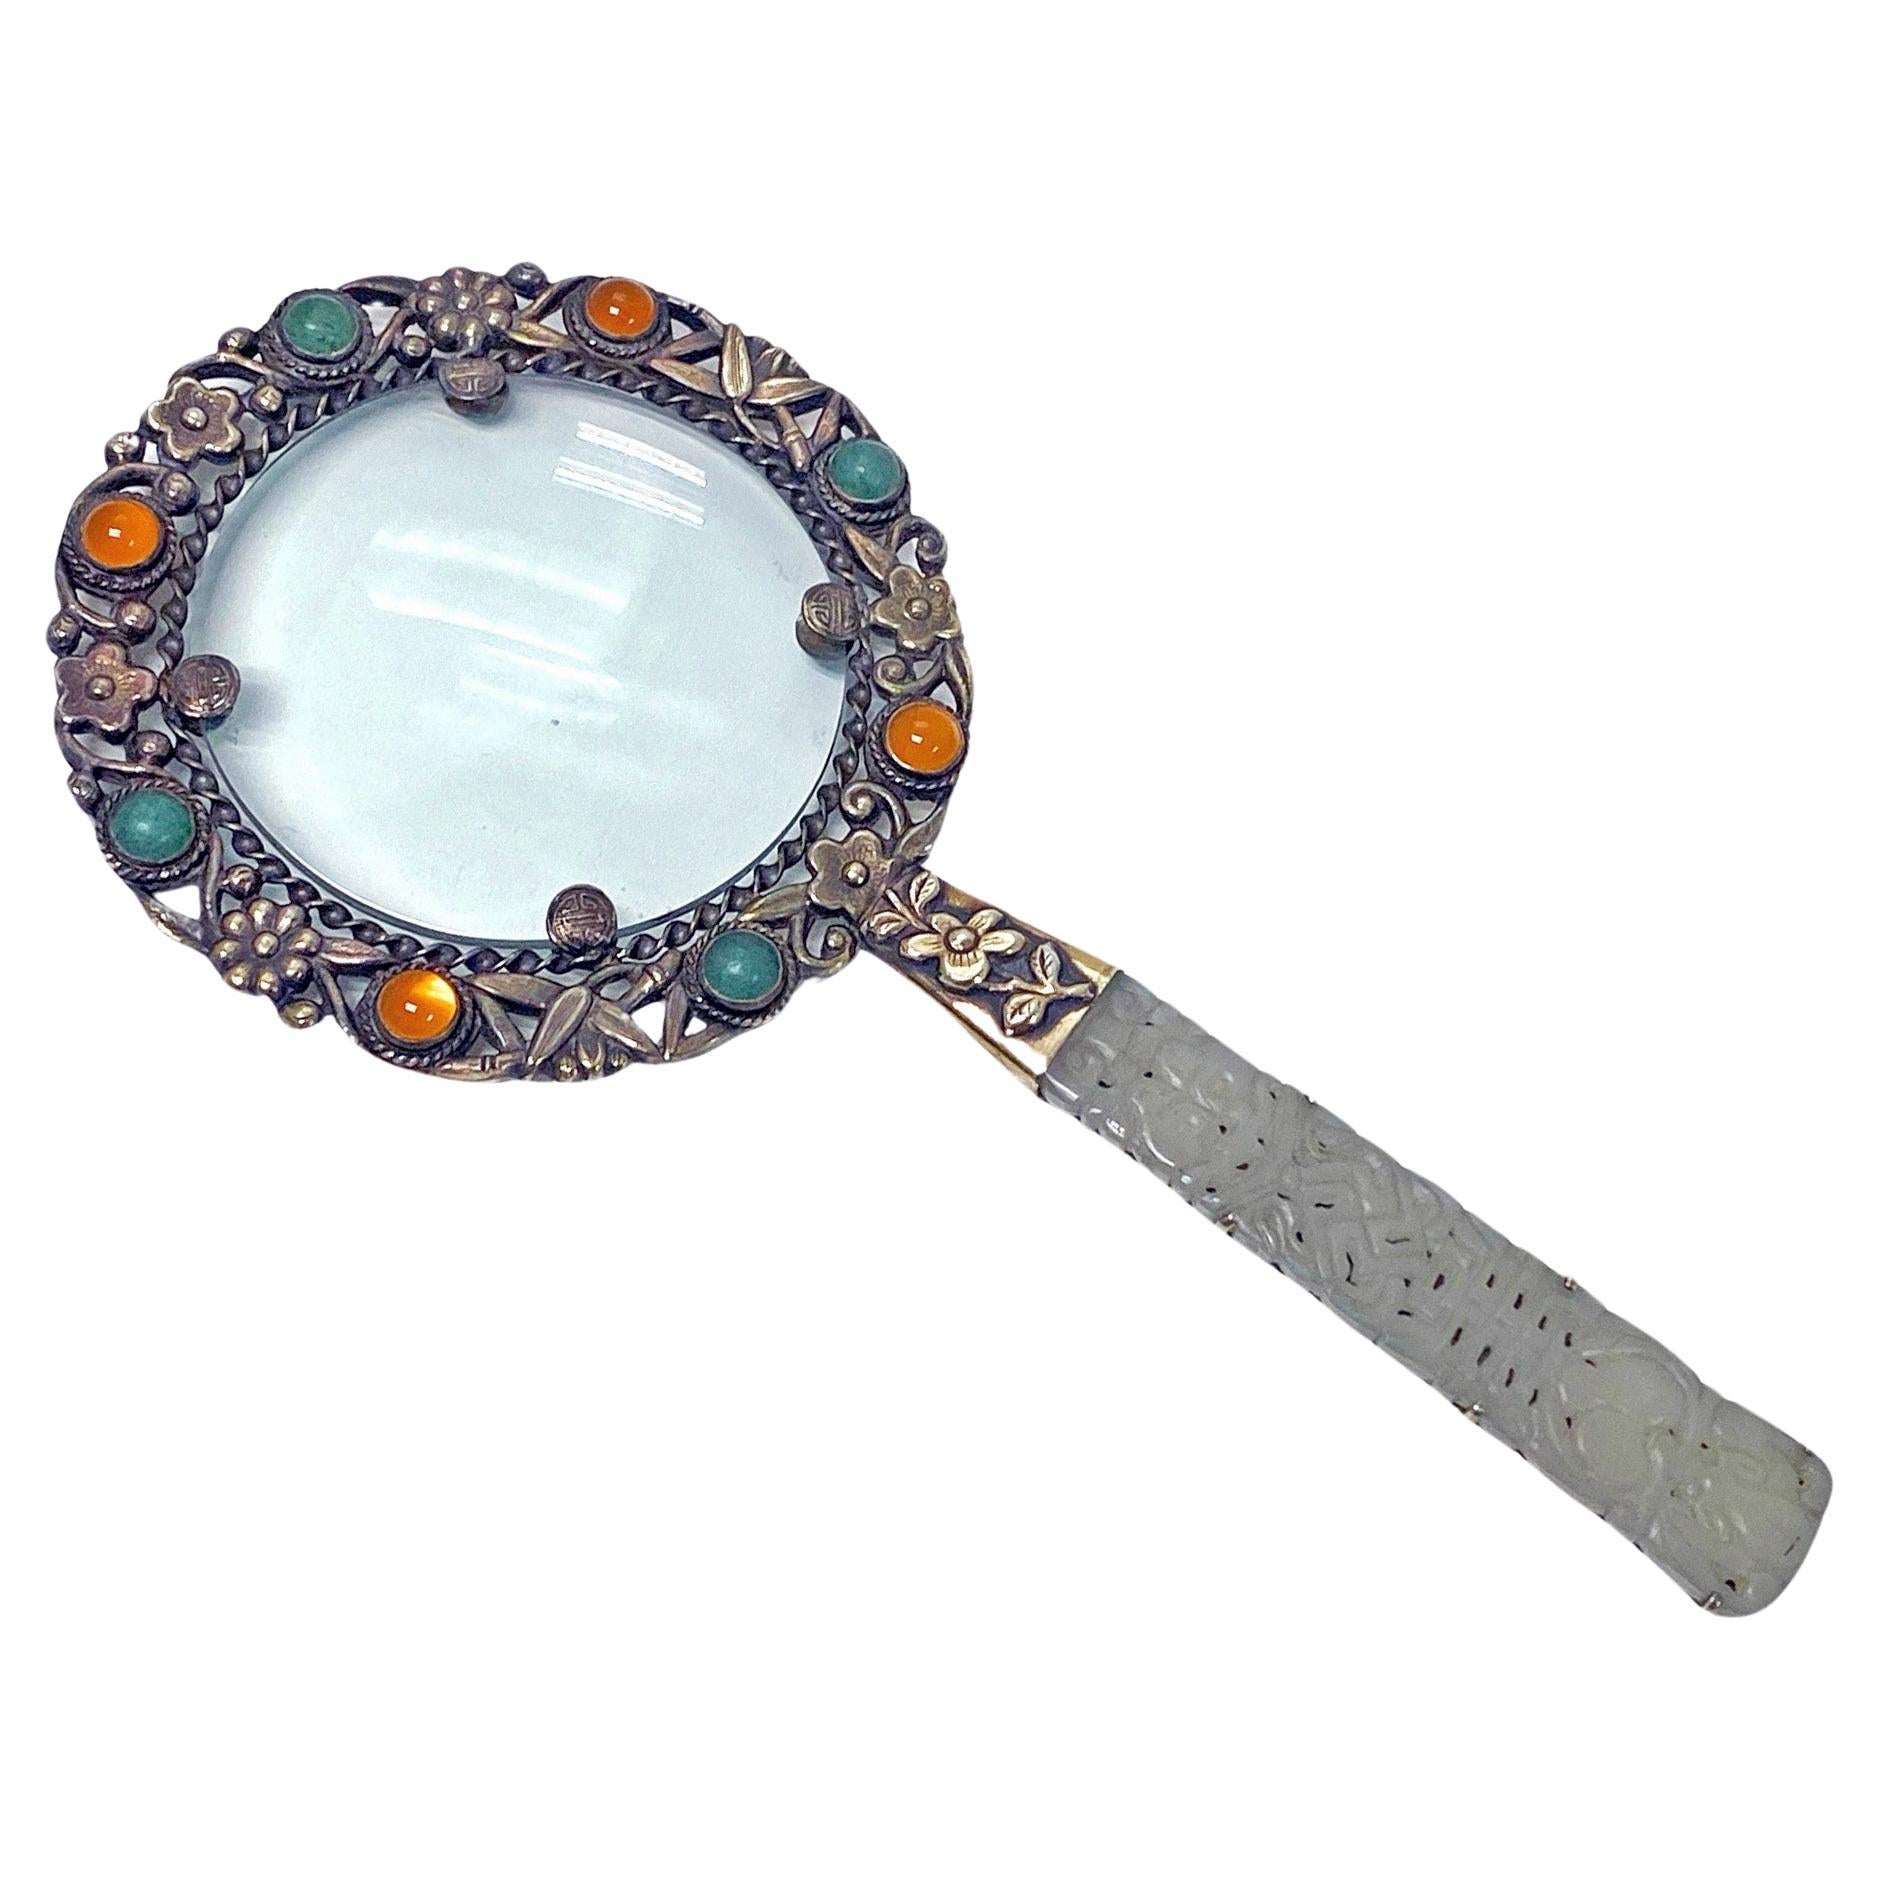  Chinese Export Silver and Jade Magnifying Glass, C.1890 For Sale